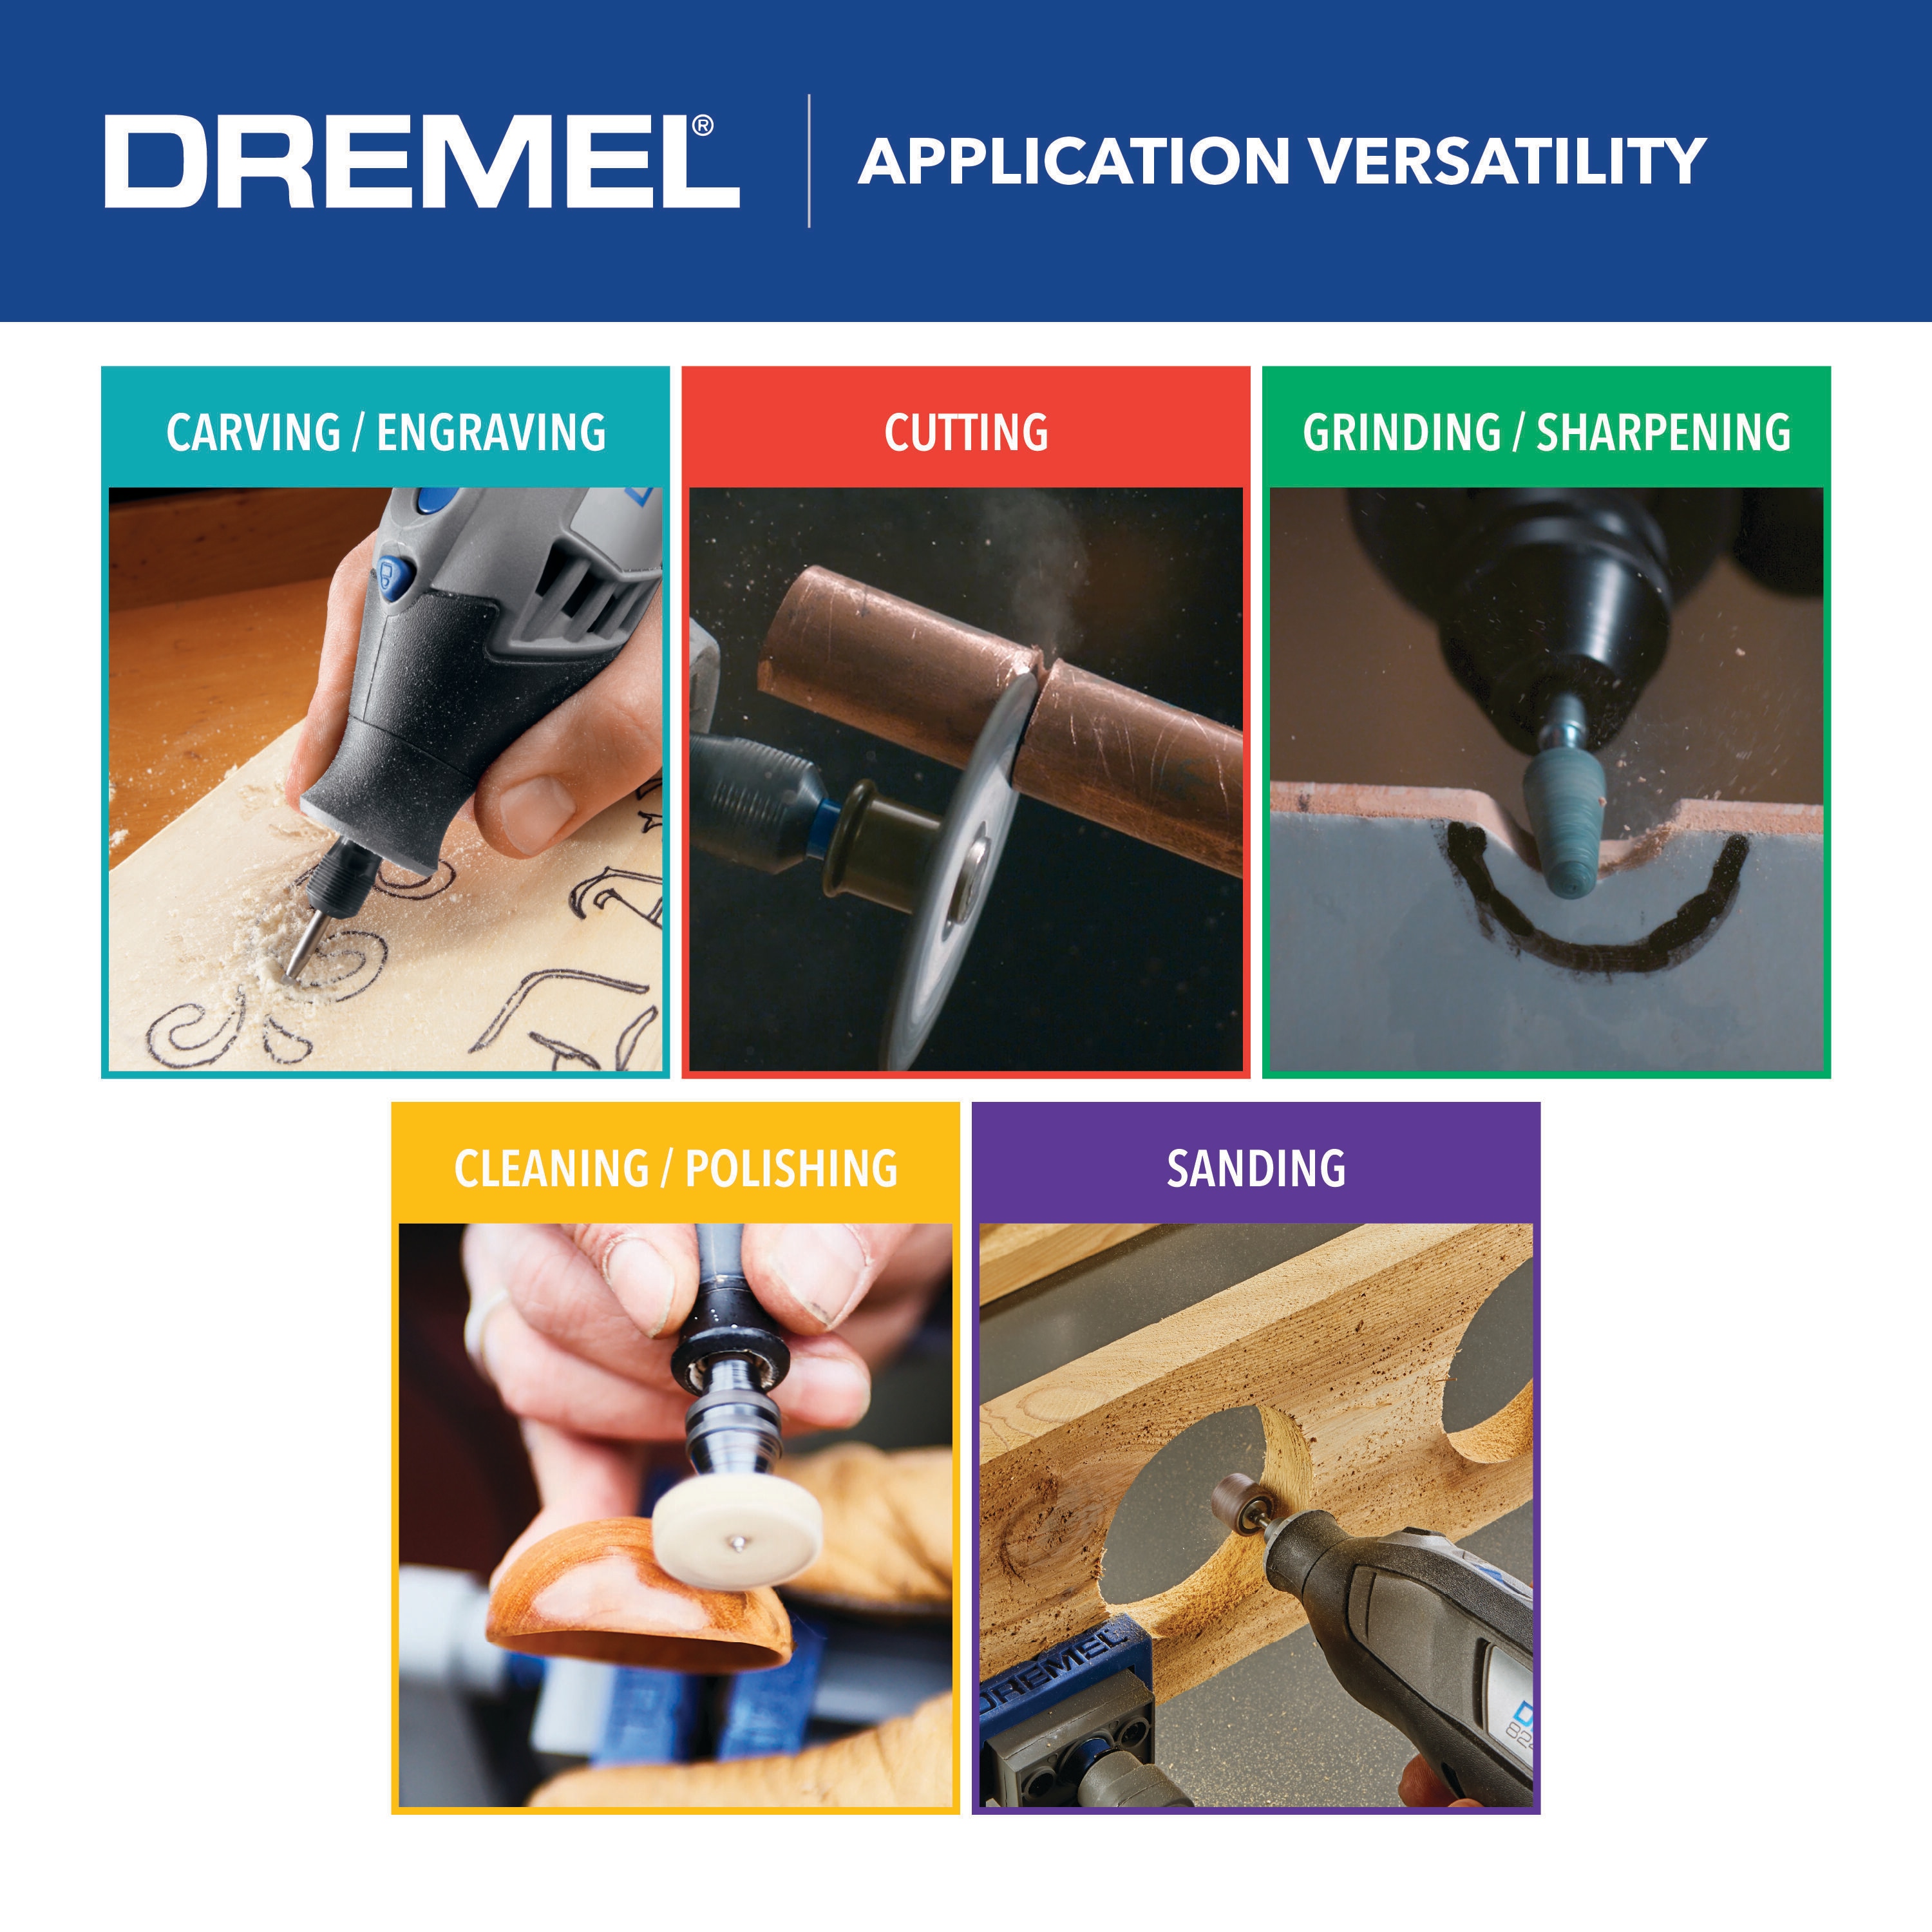 Dremel 8220 1 28 12V Max Lithium Ion Rotary Tool Kit With 1 5 Ah Battery  Pack From Hmkjhome, $237.04